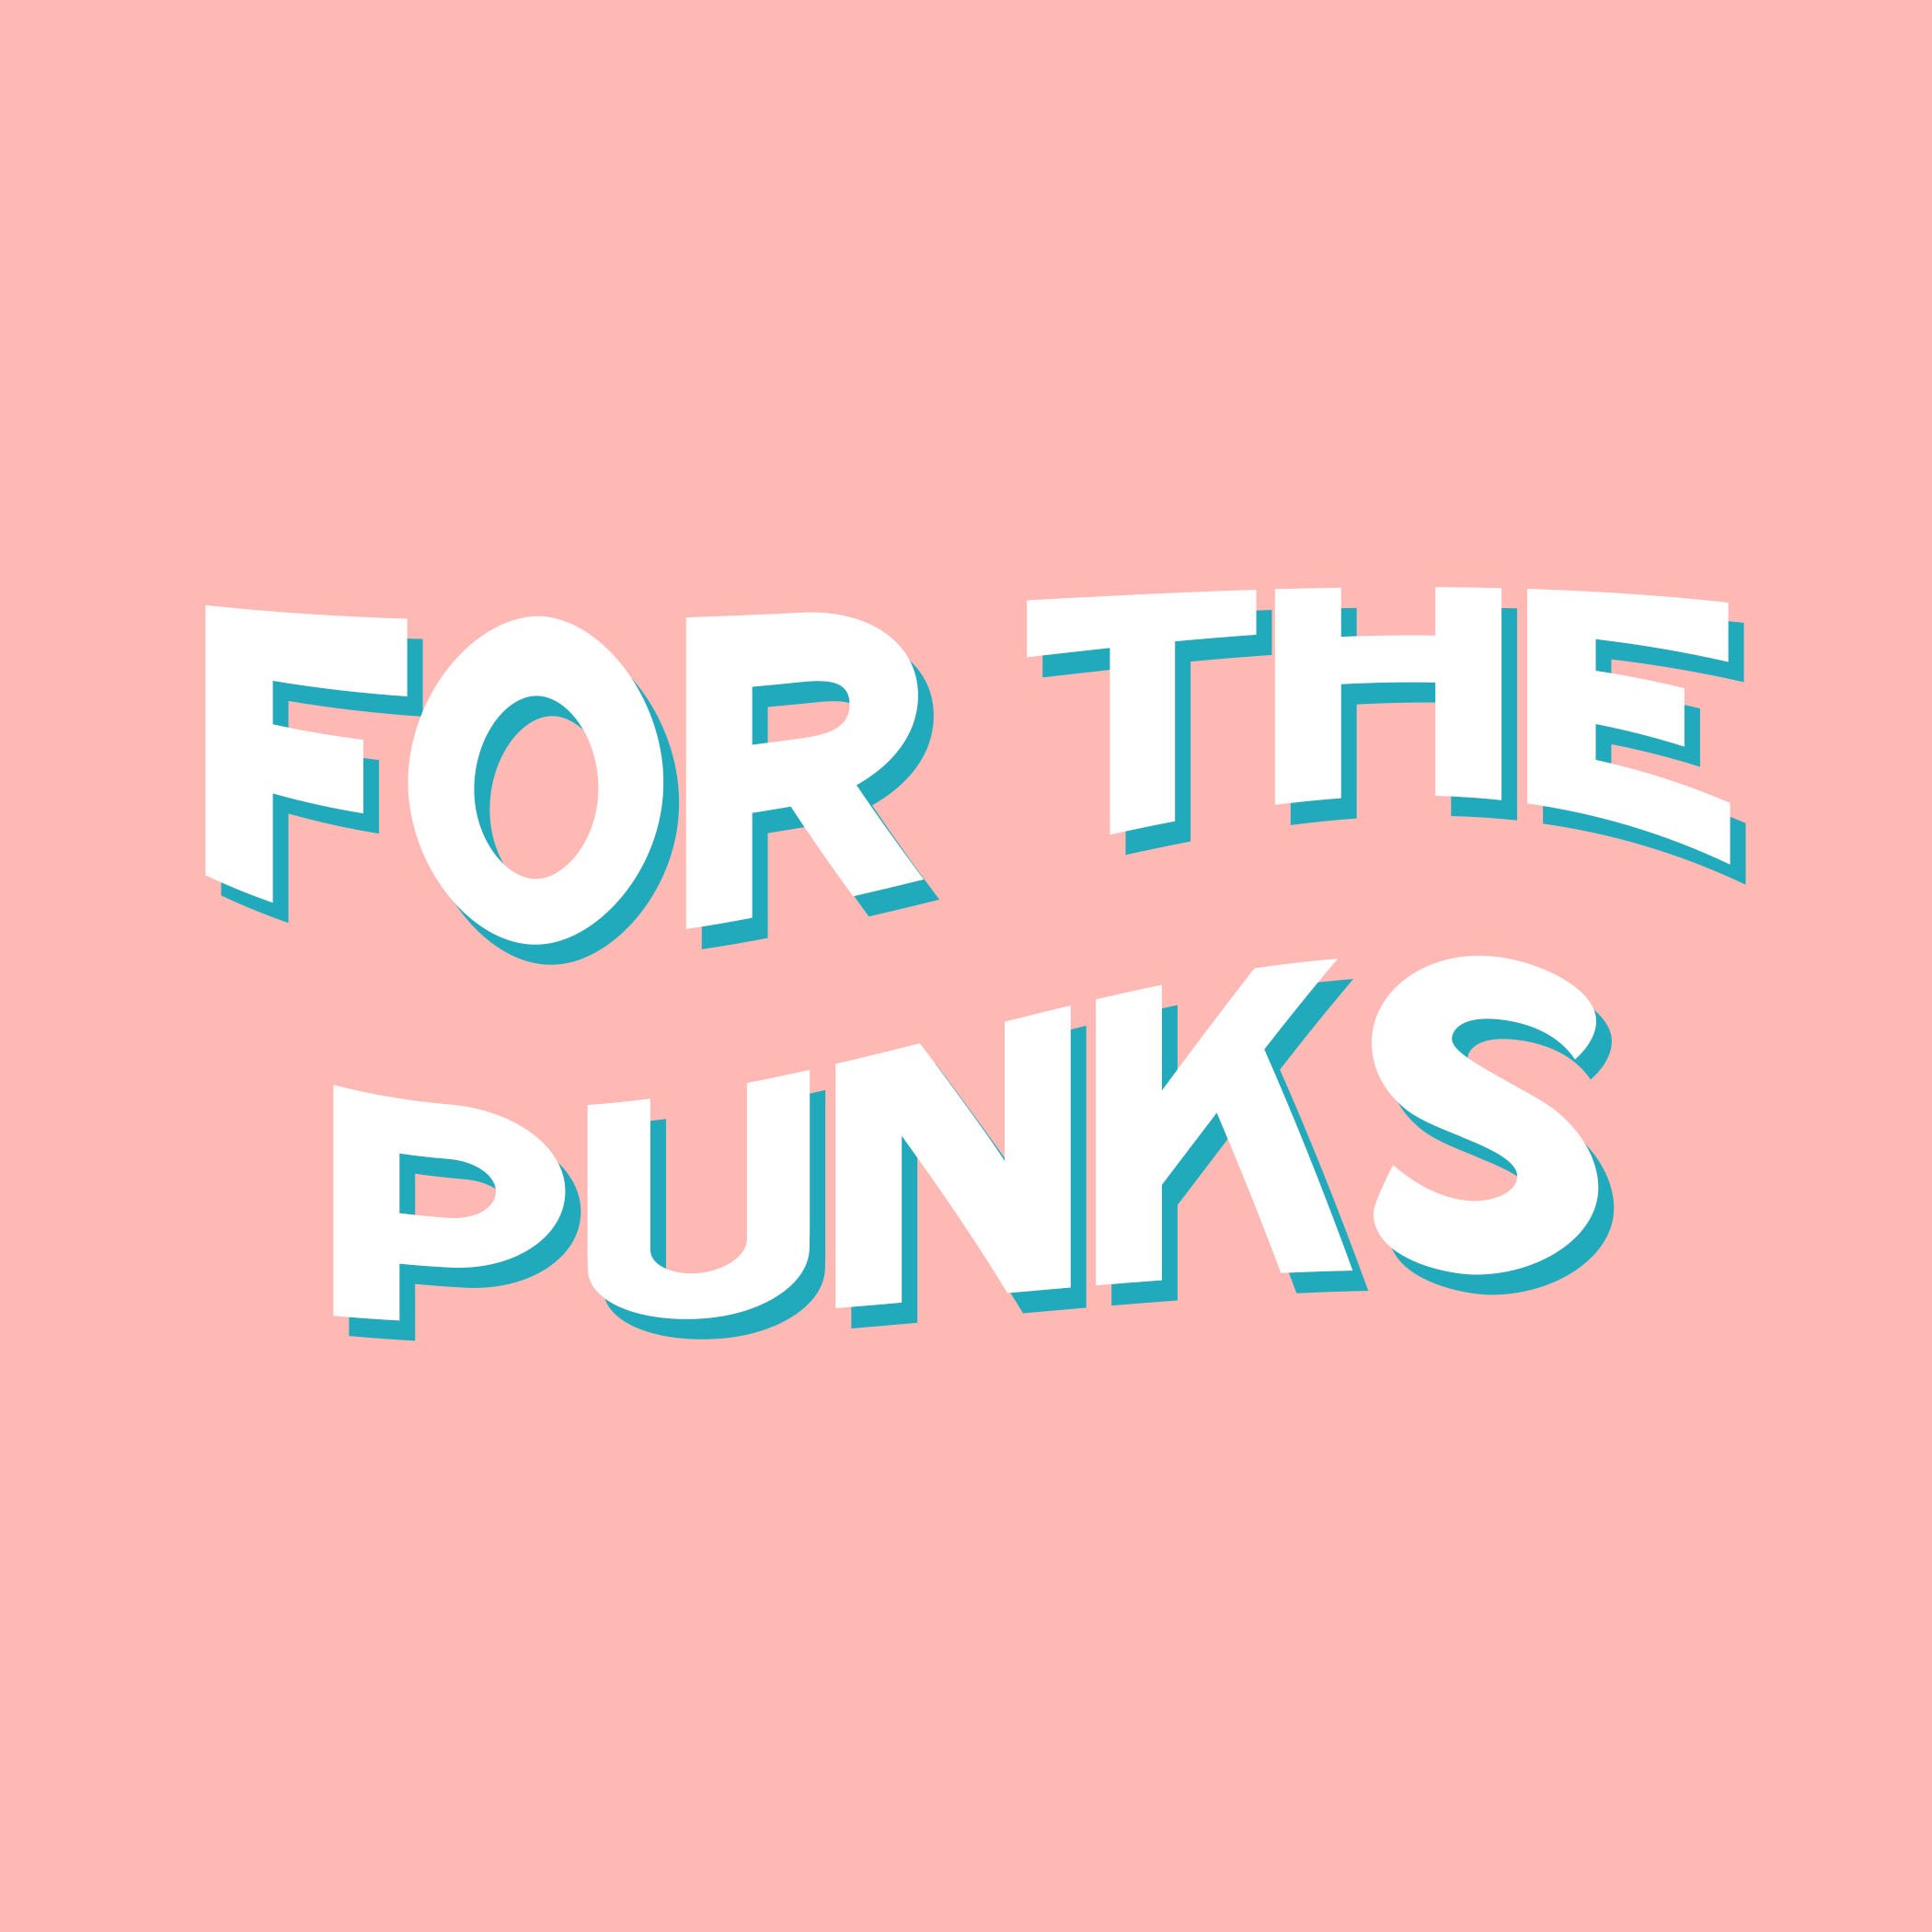 FOR THE PUNKS - Music & Arts Magazine - For The Punks